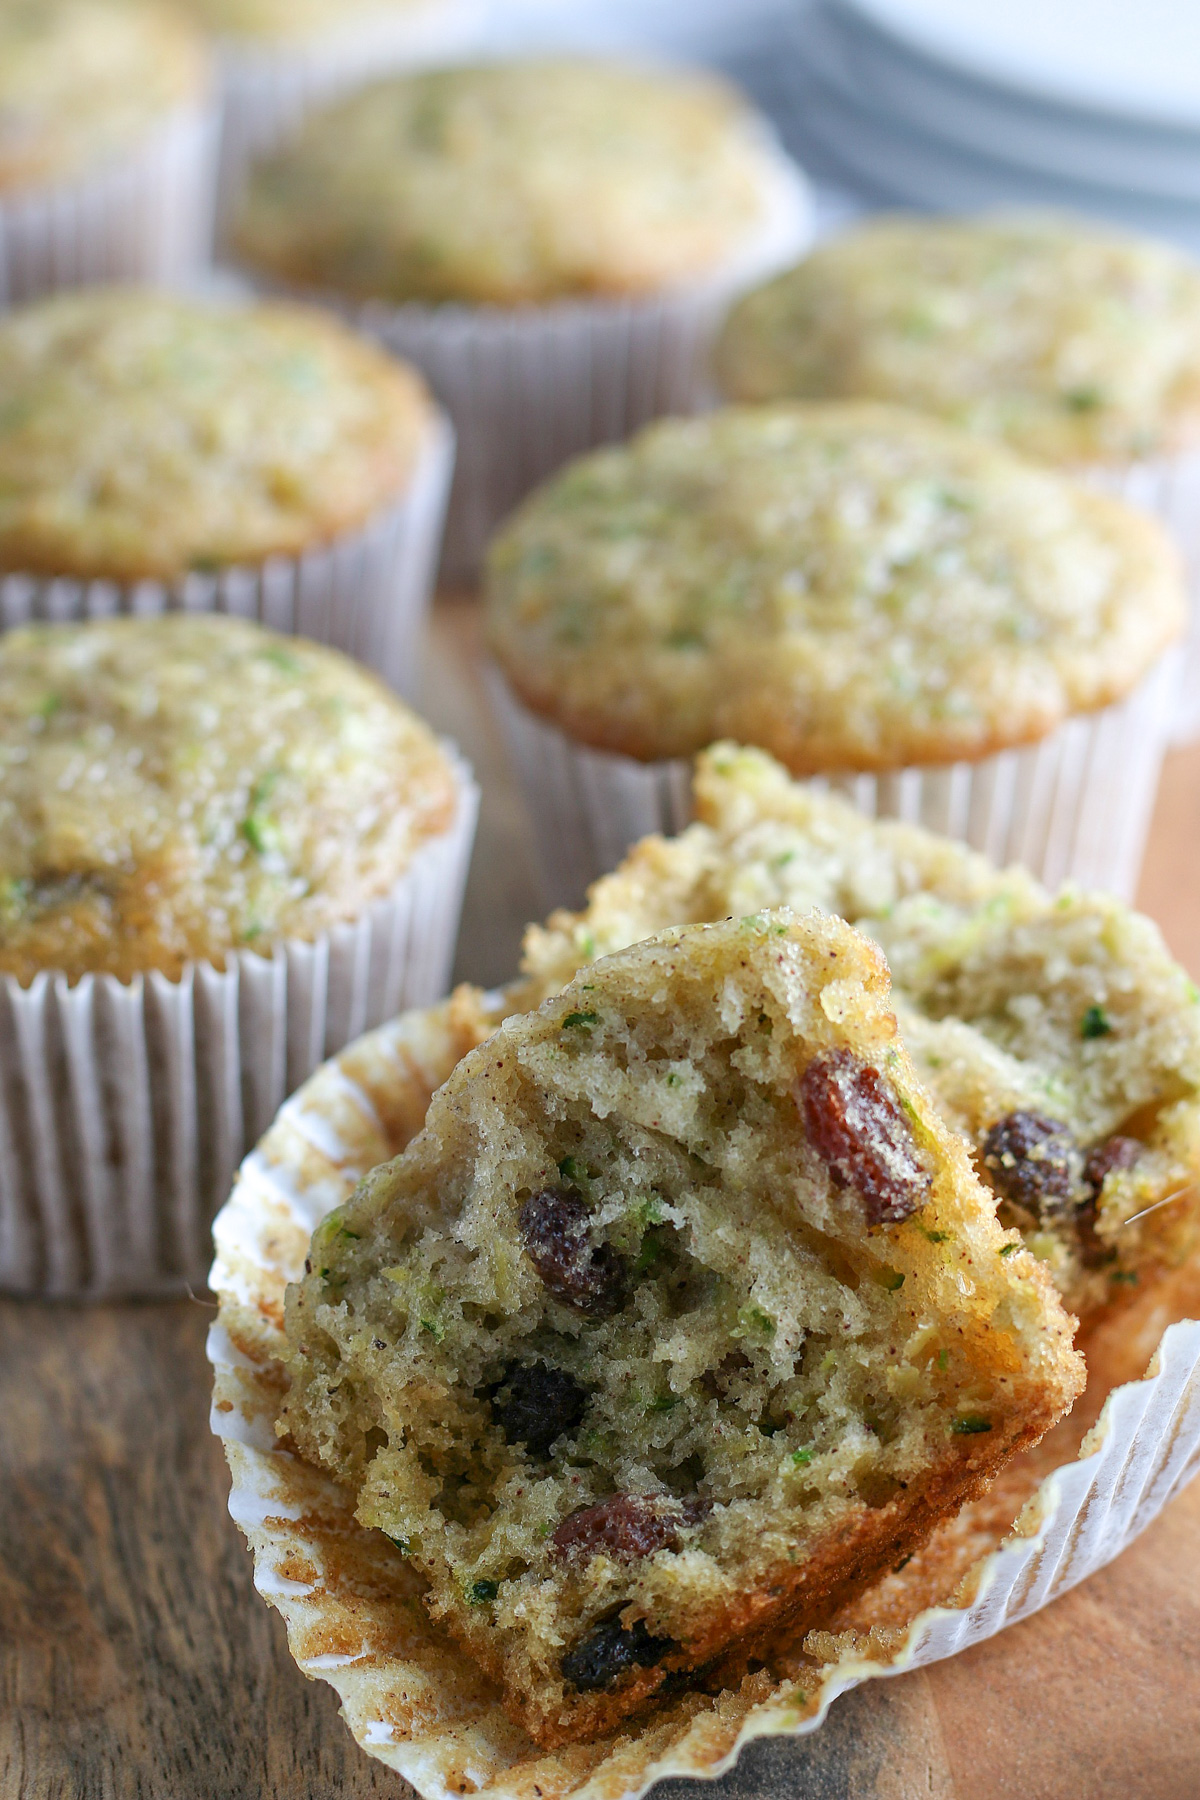 dairy-free zucchini muffins on wooden cutting board with one muffin cut in half